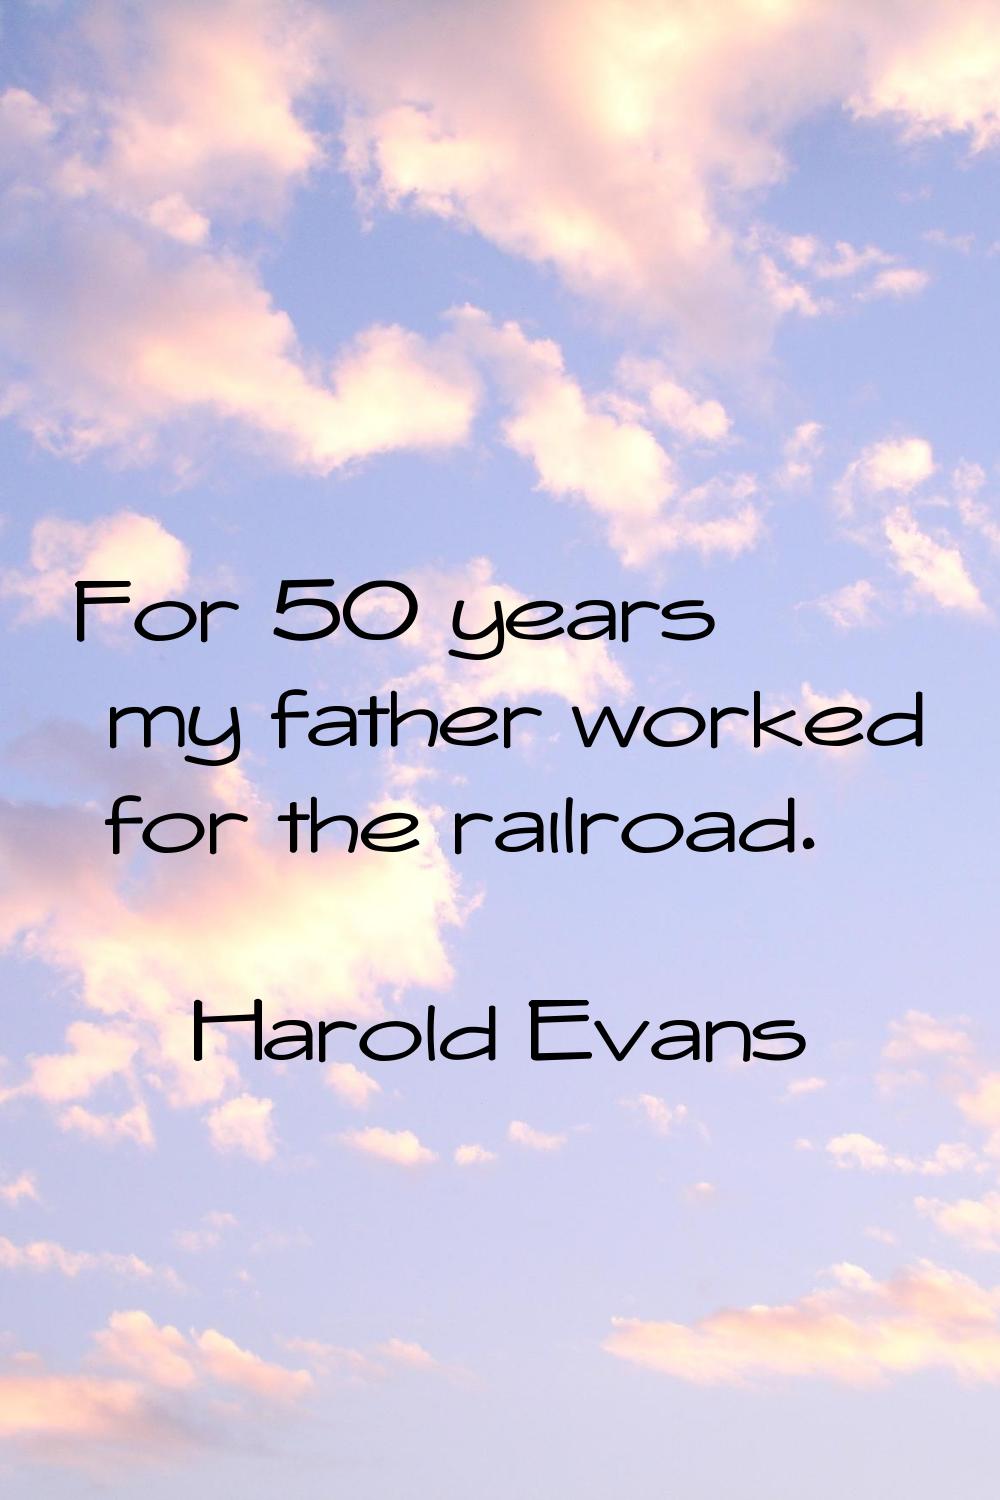 For 50 years my father worked for the railroad.